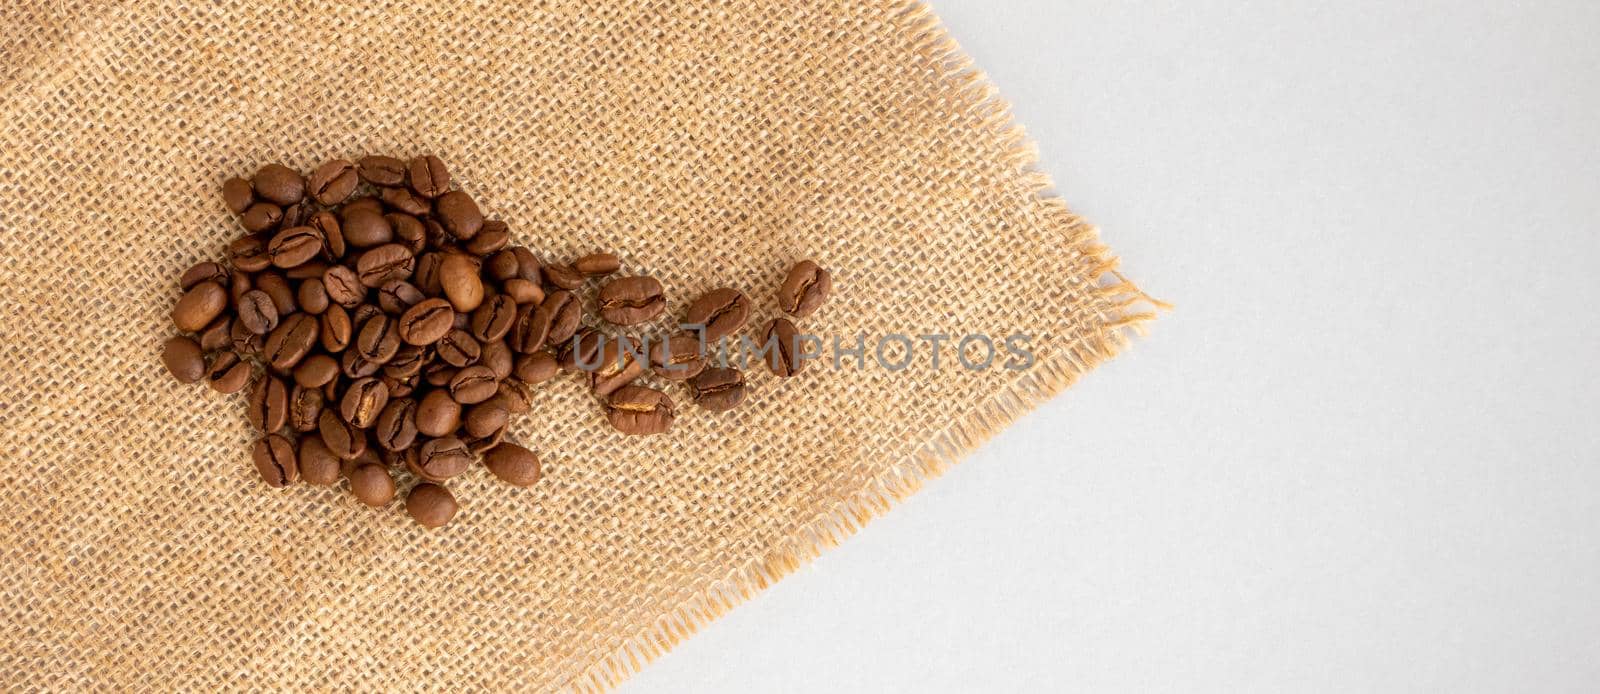 Coffee beans and burlap lie on a gray background.